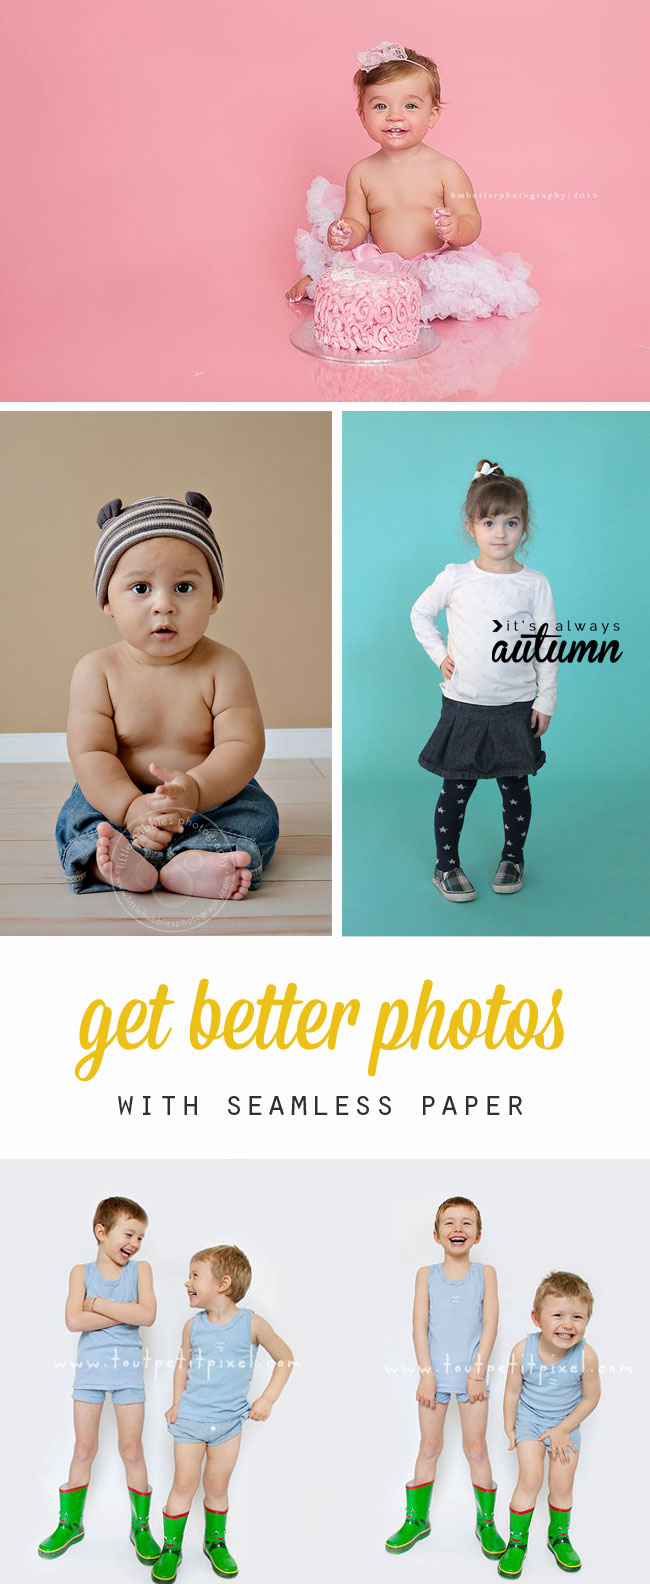 cool! post shows how to get a professional looking photo with a seamless paper background